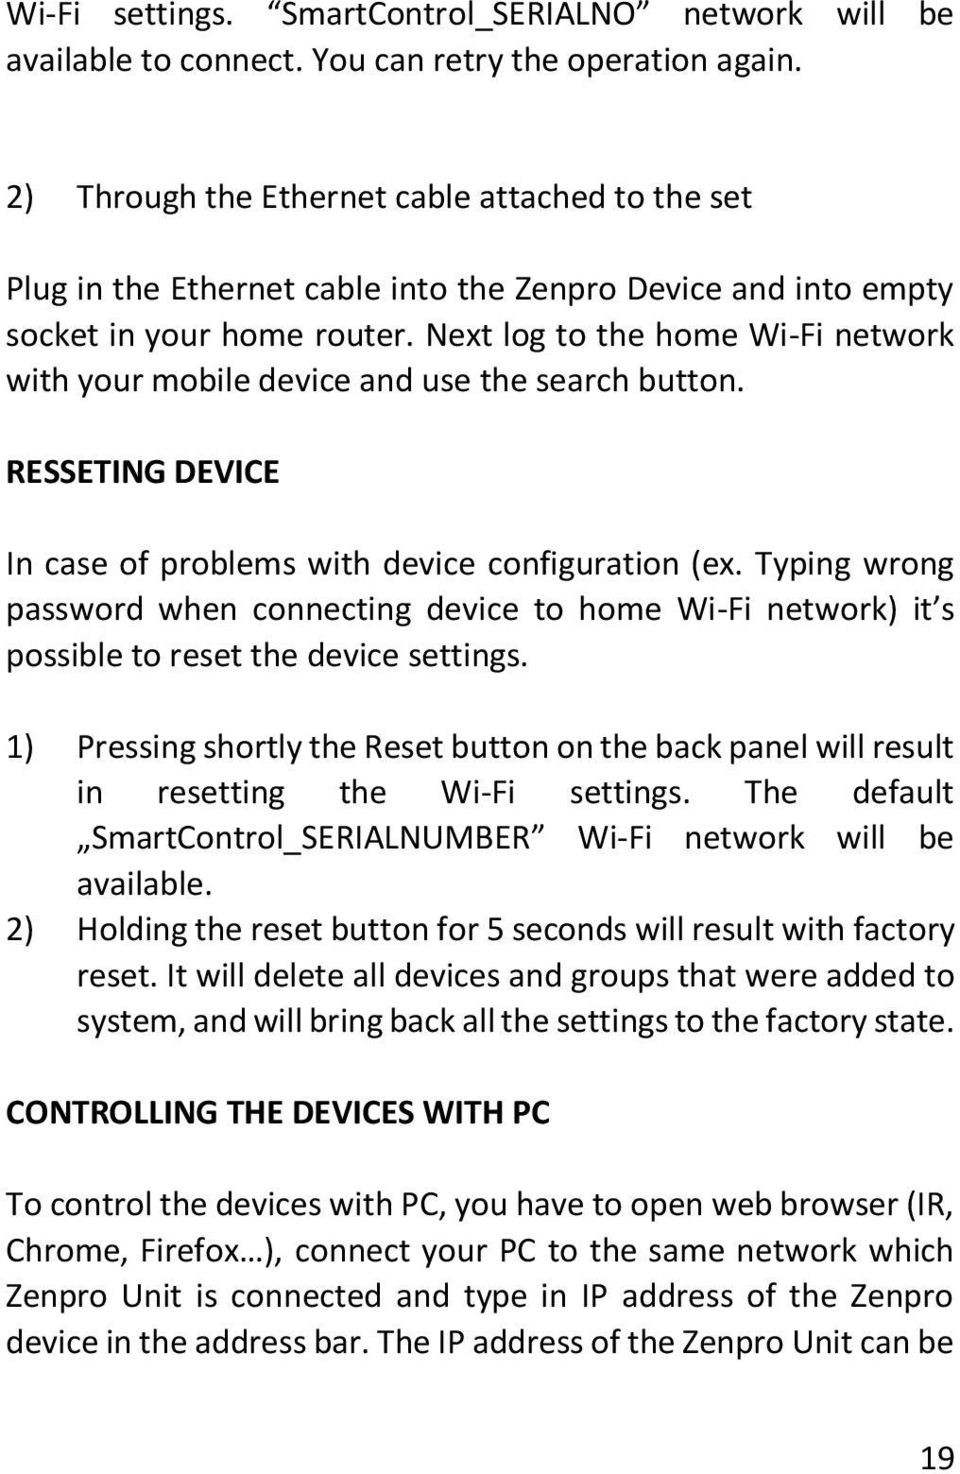 Next log to the home Wi-Fi network with your mobile device and use the search button. RESSETING DEVICE In case of problems with device configuration (ex.